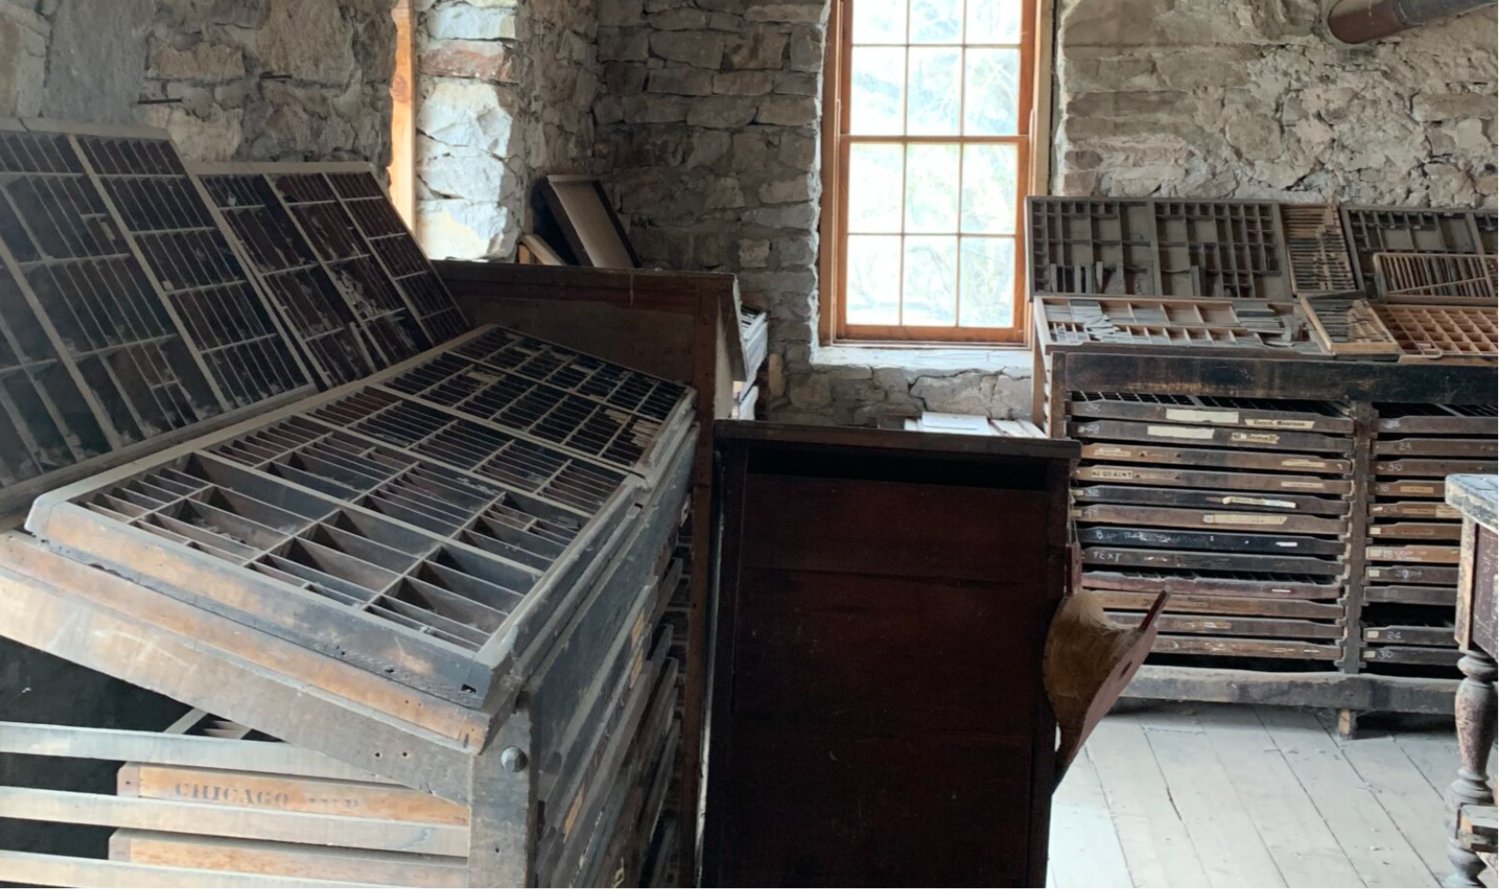 The printing cabinets and drawers of the Montana Post in Virginia City, Montana. The Montana Post was the territory’s first newspaper (Photo by Darrell Ehrlick of the Daily Montanan).